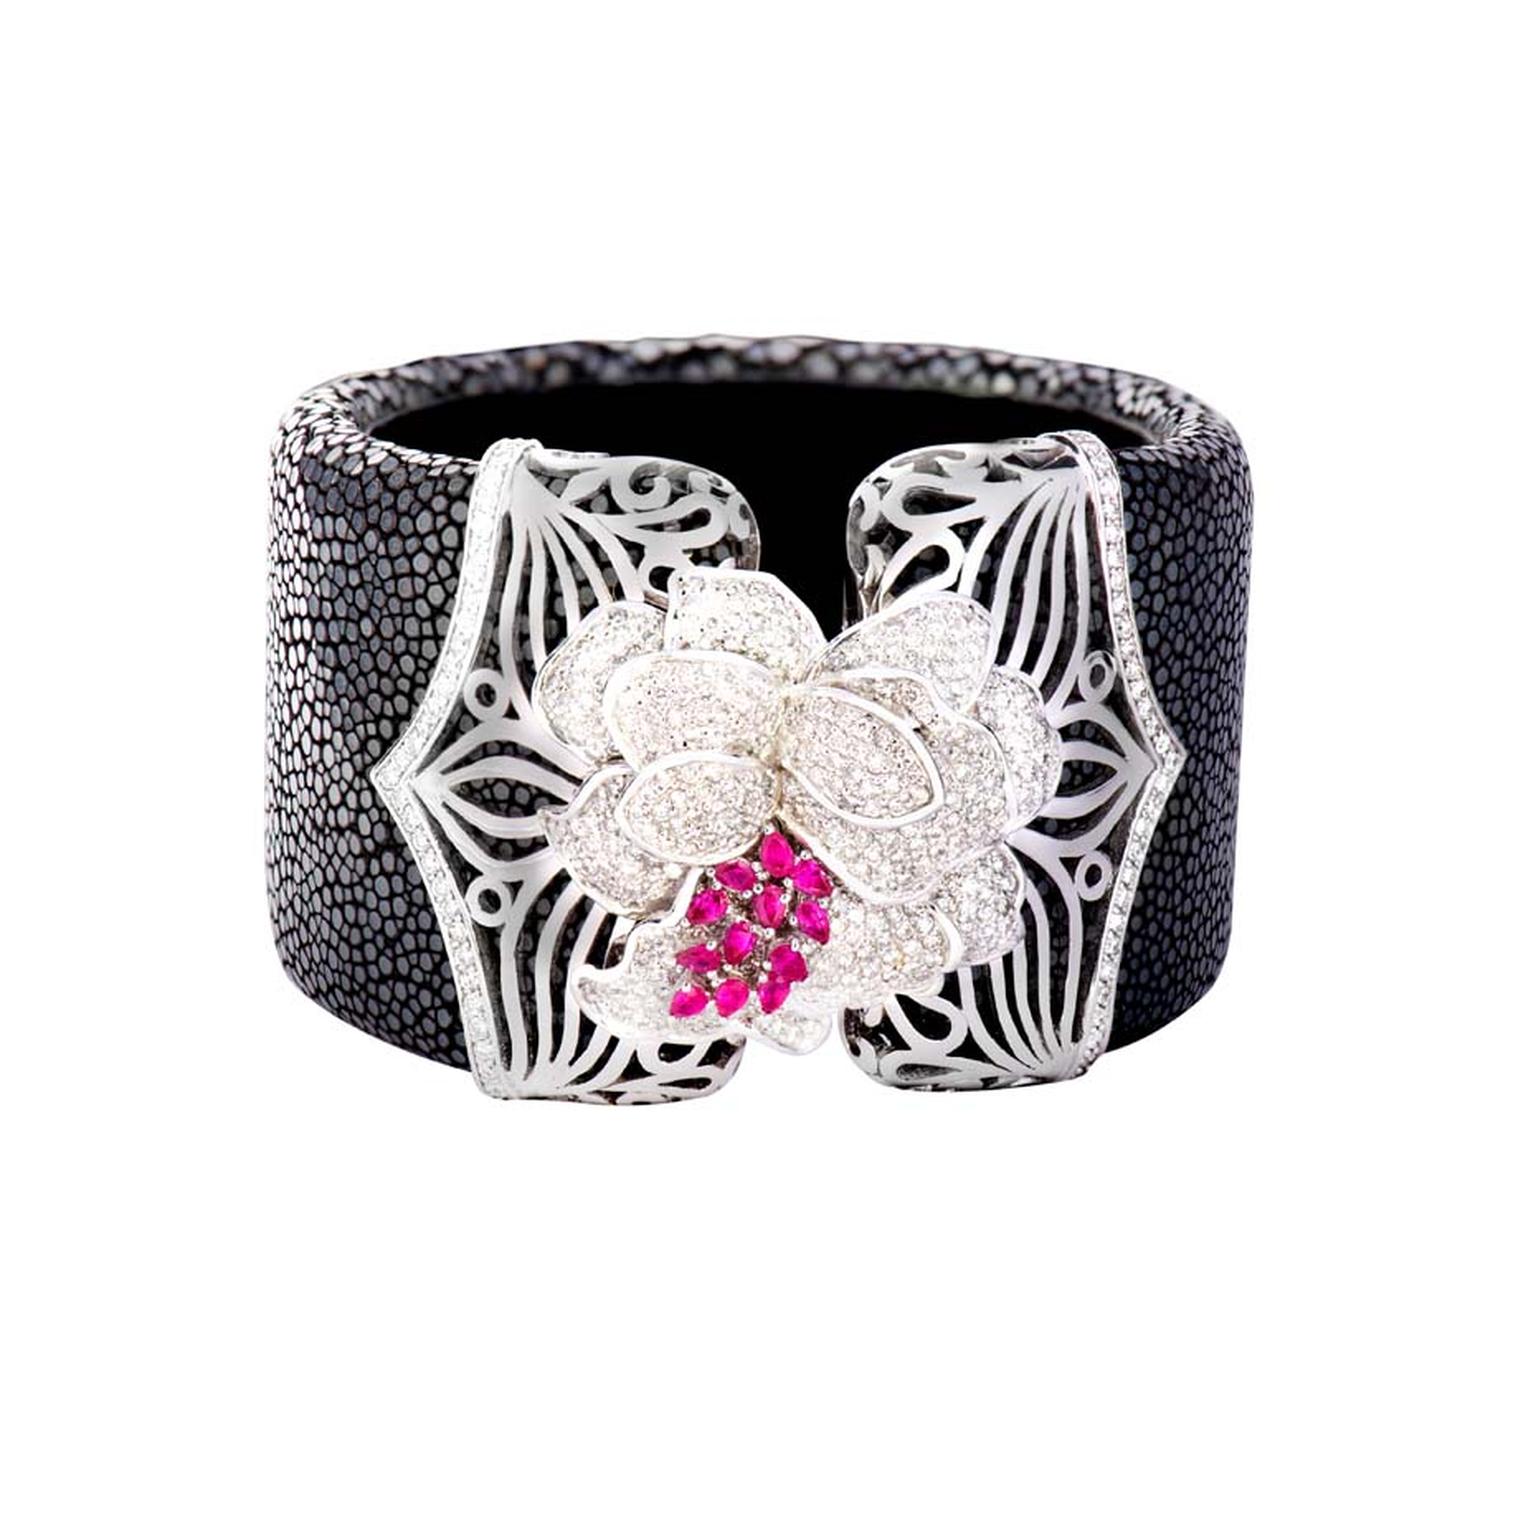 Damian by Mischelle Galuchat bangle with diamonds and rubies